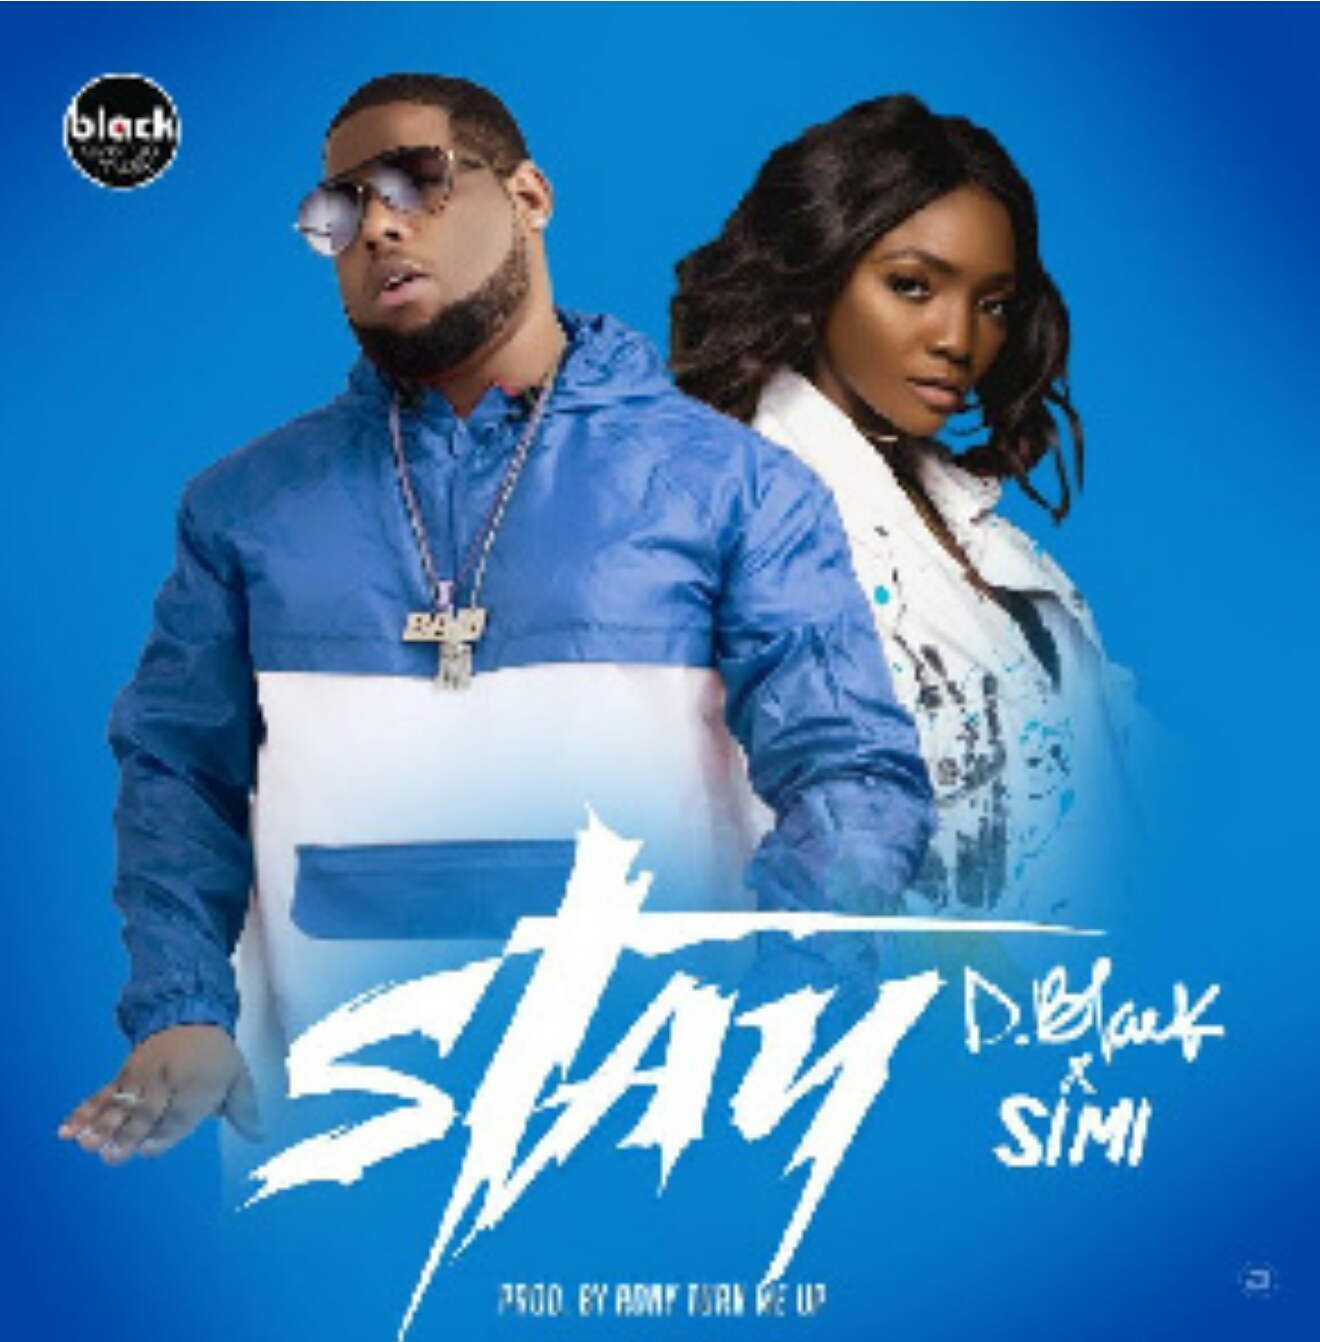 Simi expresses her emotions to 'Ghana’s D-Black in new song "Stay"